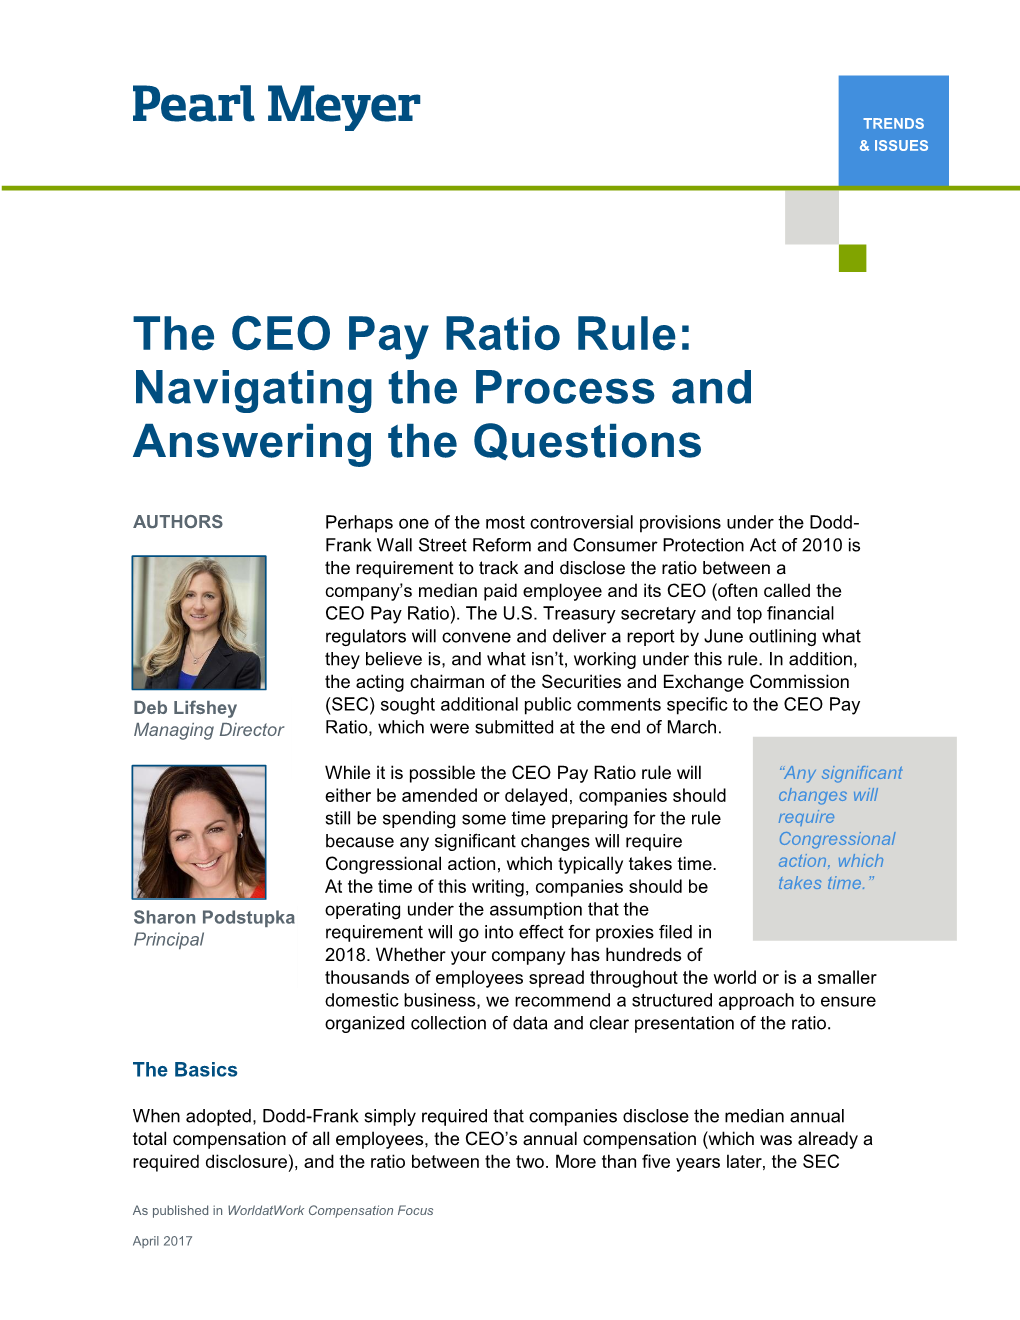 The CEO Pay Ratio Rule: Navigating the Process and Answering the Questions